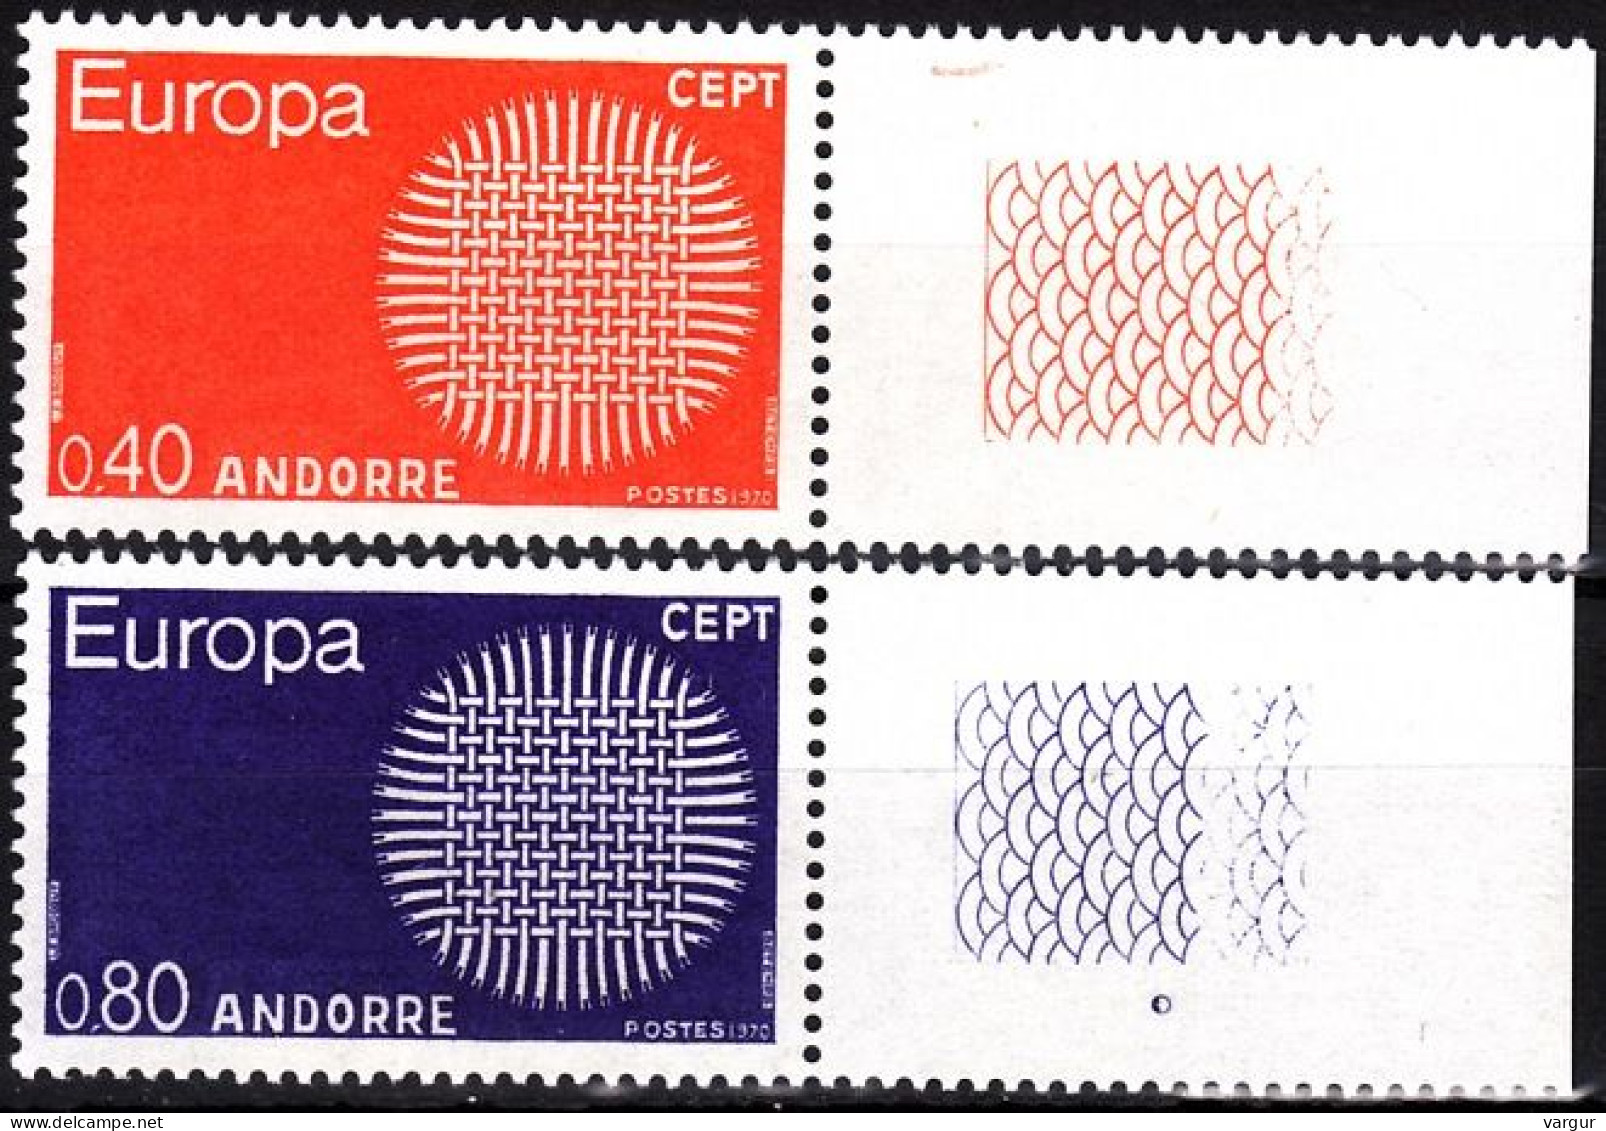 ANDORRA FRENCH 1970 EUROPA. Complete Set With Designed Margins, MNH - 1970